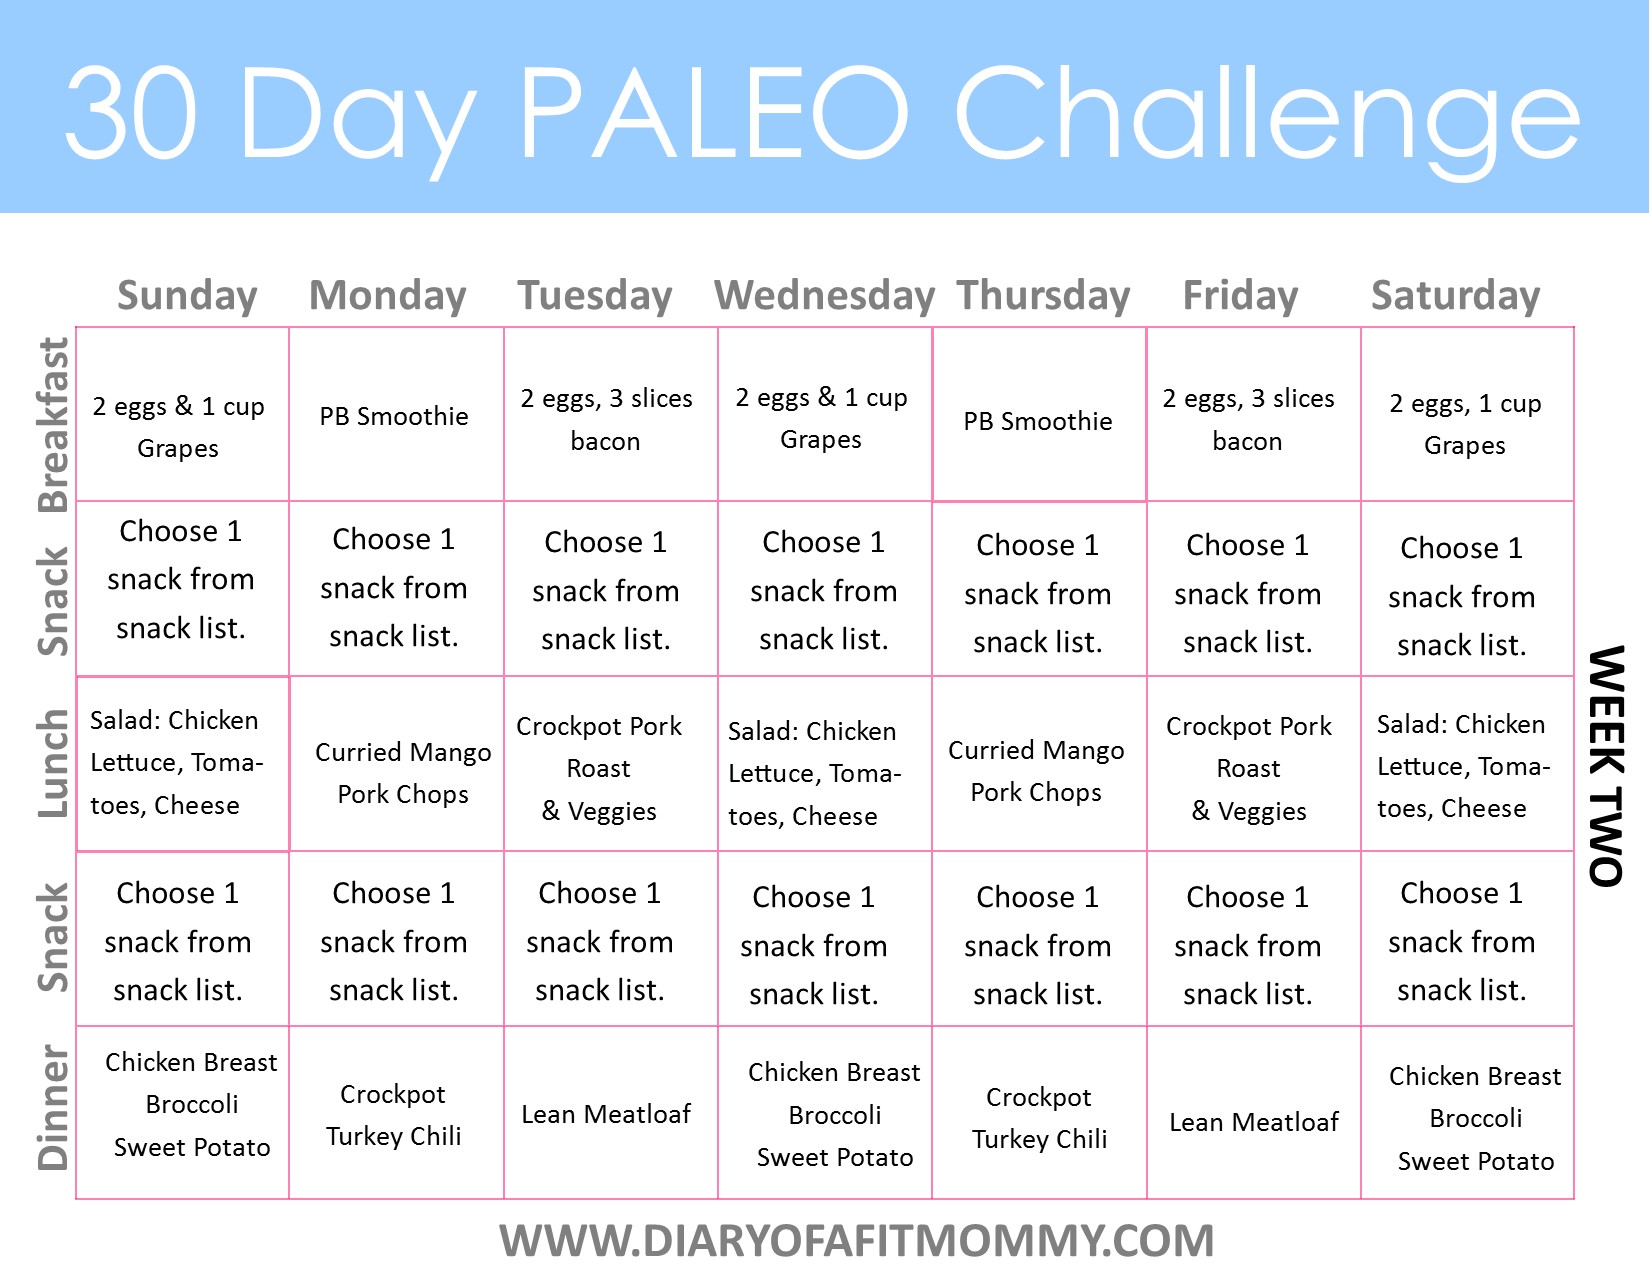 30 Day Paleo Challenge | Diary of a Fit Mommy | Bloglovin’